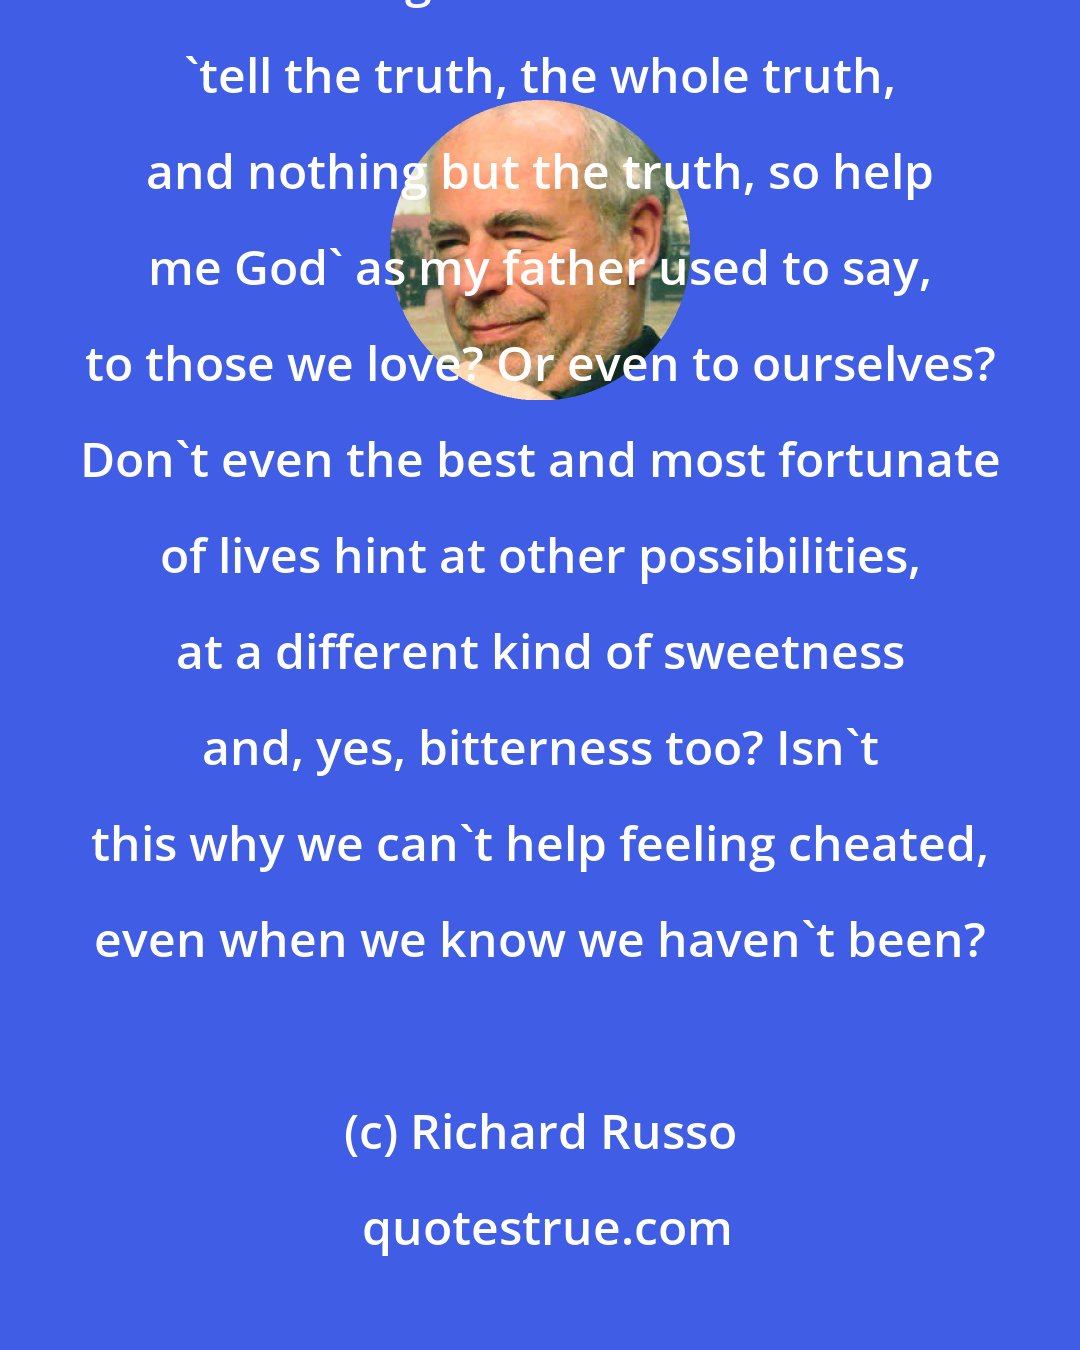 Richard Russo: I told him the truth, that I loved him and didn't regret anything about our lives together. But do we ever 'tell the truth, the whole truth, and nothing but the truth, so help me God' as my father used to say, to those we love? Or even to ourselves? Don't even the best and most fortunate of lives hint at other possibilities, at a different kind of sweetness and, yes, bitterness too? Isn't this why we can't help feeling cheated, even when we know we haven't been?